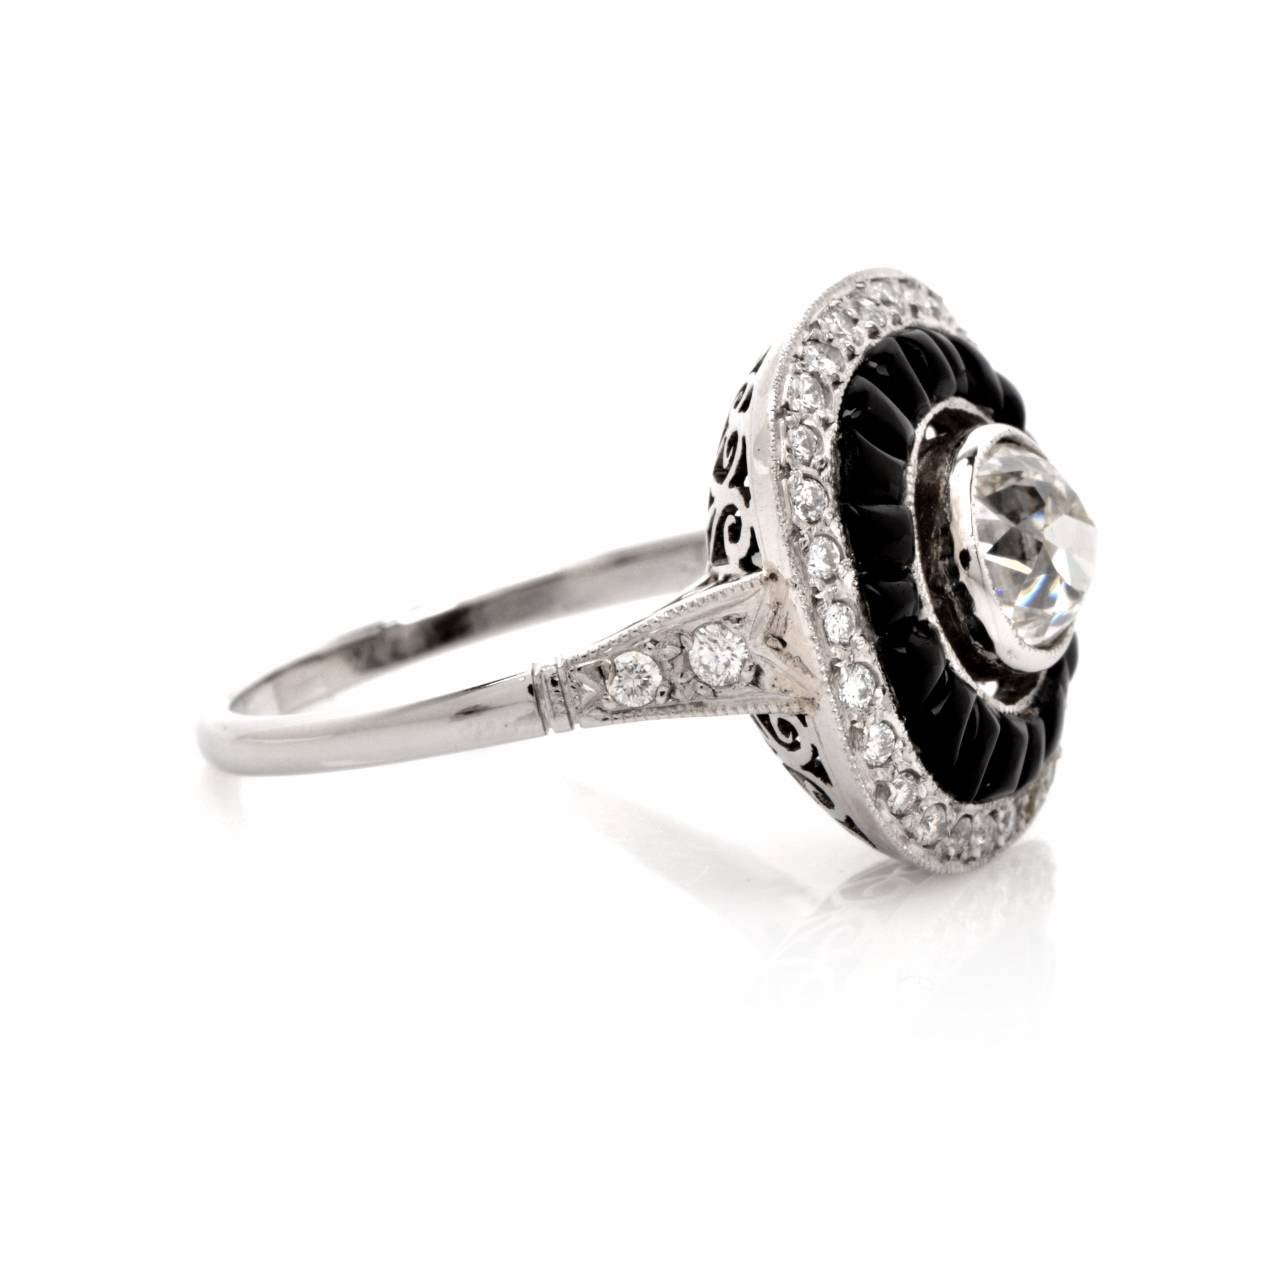 This antique Art Deco engagement ring with diamonds is crafted in solid platinum and weighs approx.  7.3 grams. Designed as a rounded quadrangular plaque, this quintessentially Art Deco engagement ring is centered with a significant 1.10 ct old